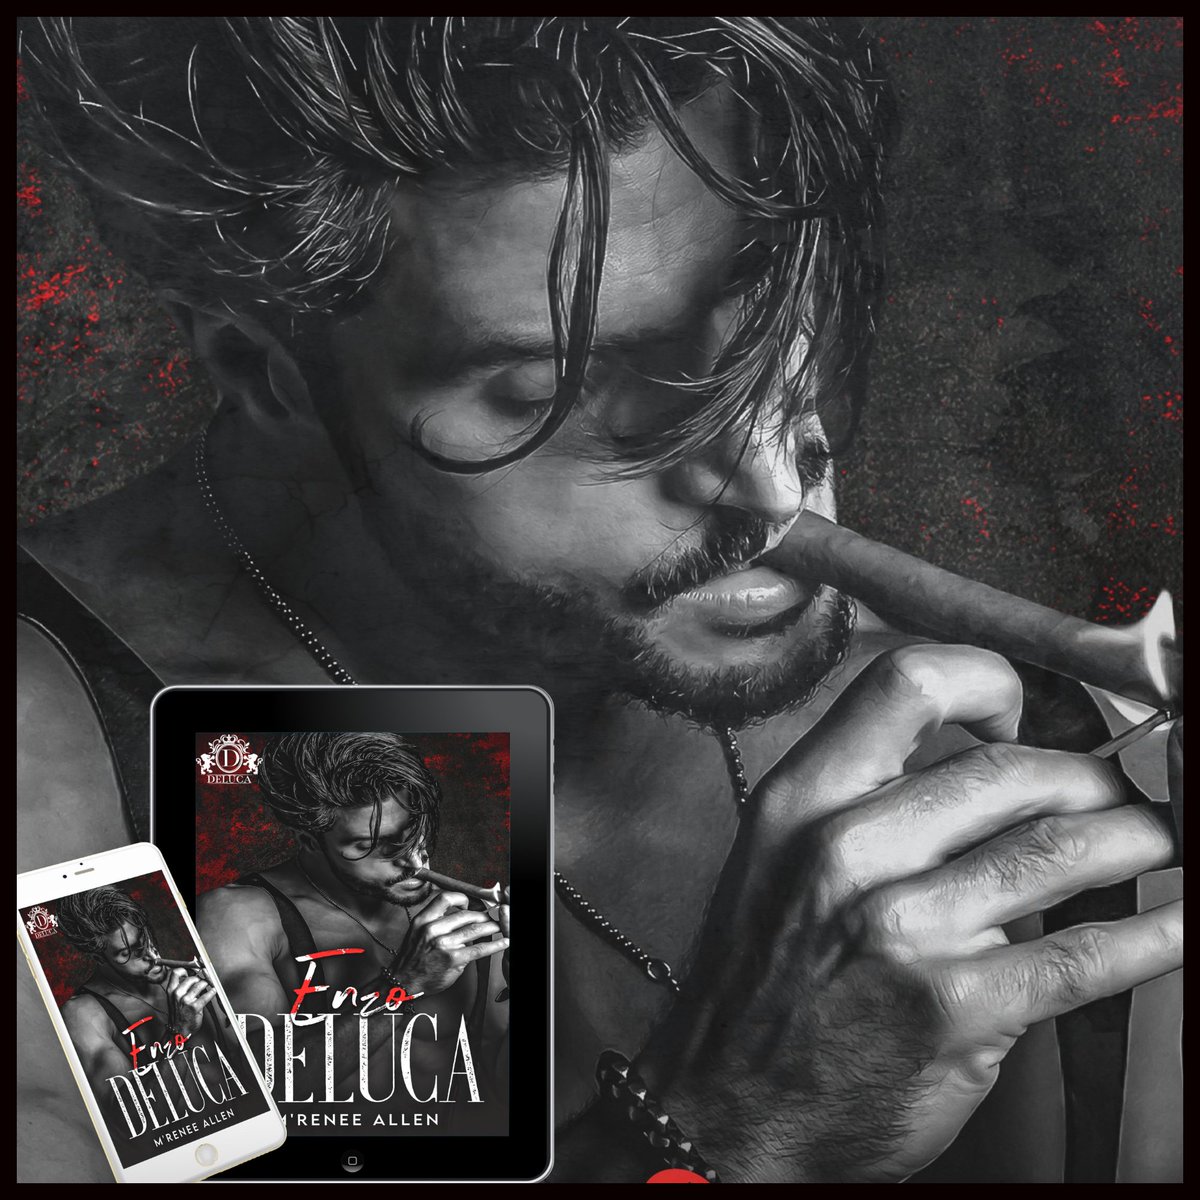 ♥️Mafia Romance!♥️ 
In a world of darkness, one woman brings light to the heart of a ruthless don. Enzo DeLuca is available now. Download your copy today. 
amzn.to/3OSUZpj 
#SavageBloodlineSeries #MafiaRomance #RomanticSuspense